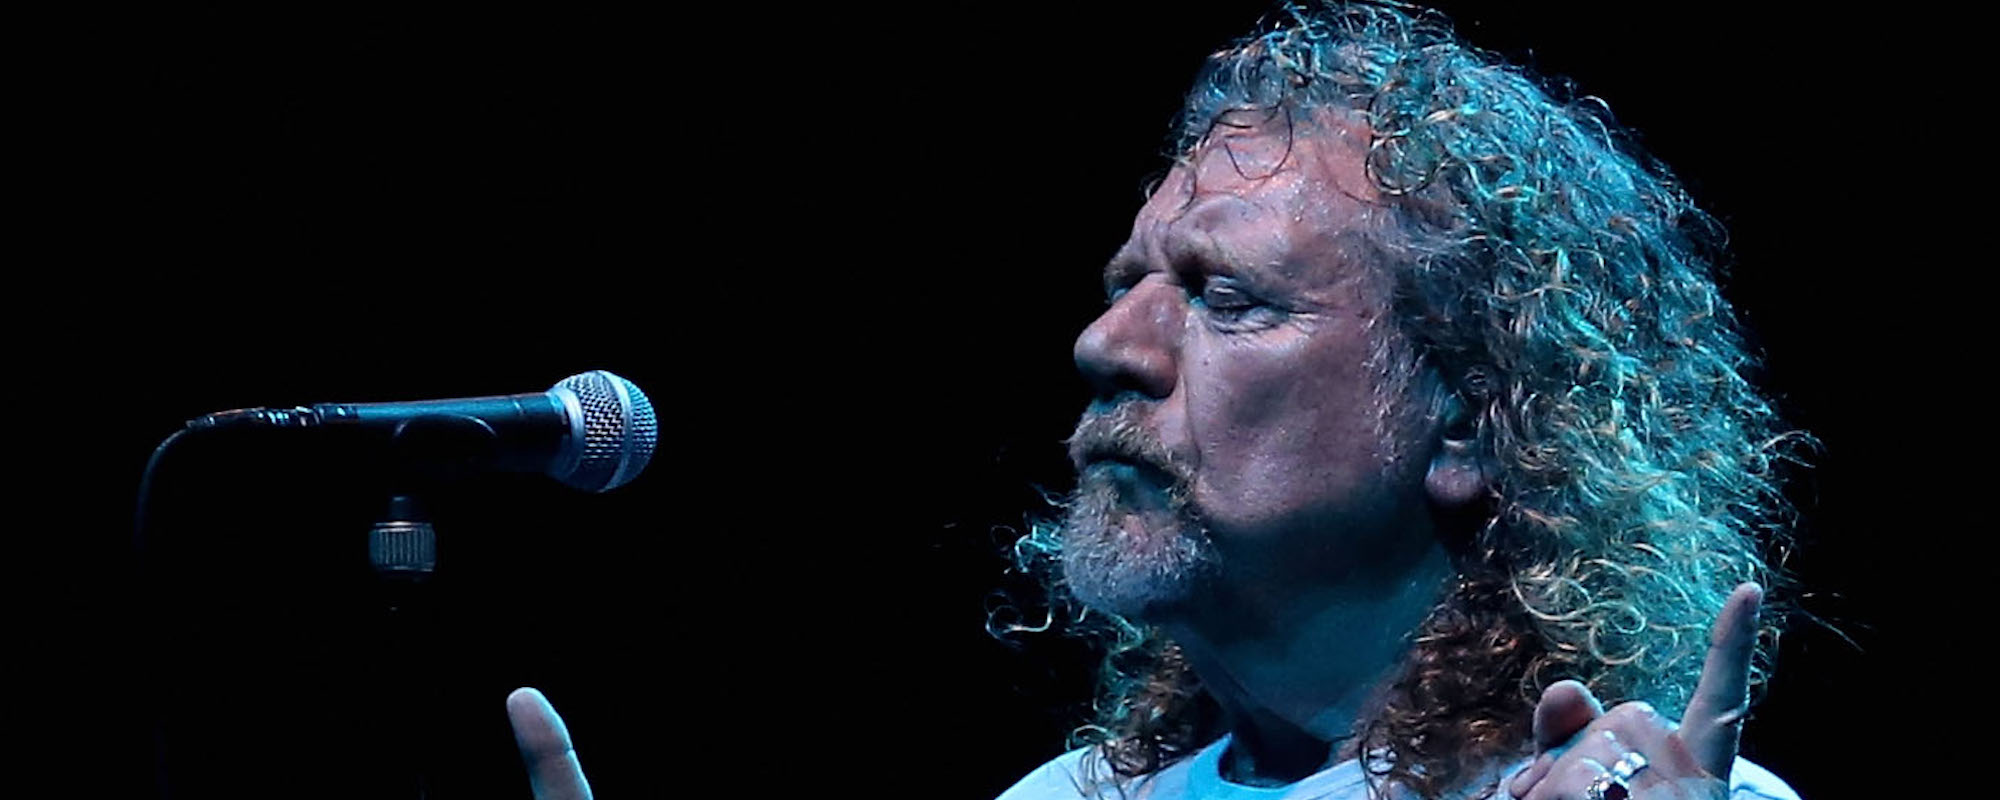 The Song Robert Plant Struggled to Sing—and It’s Not by Led Zeppelin